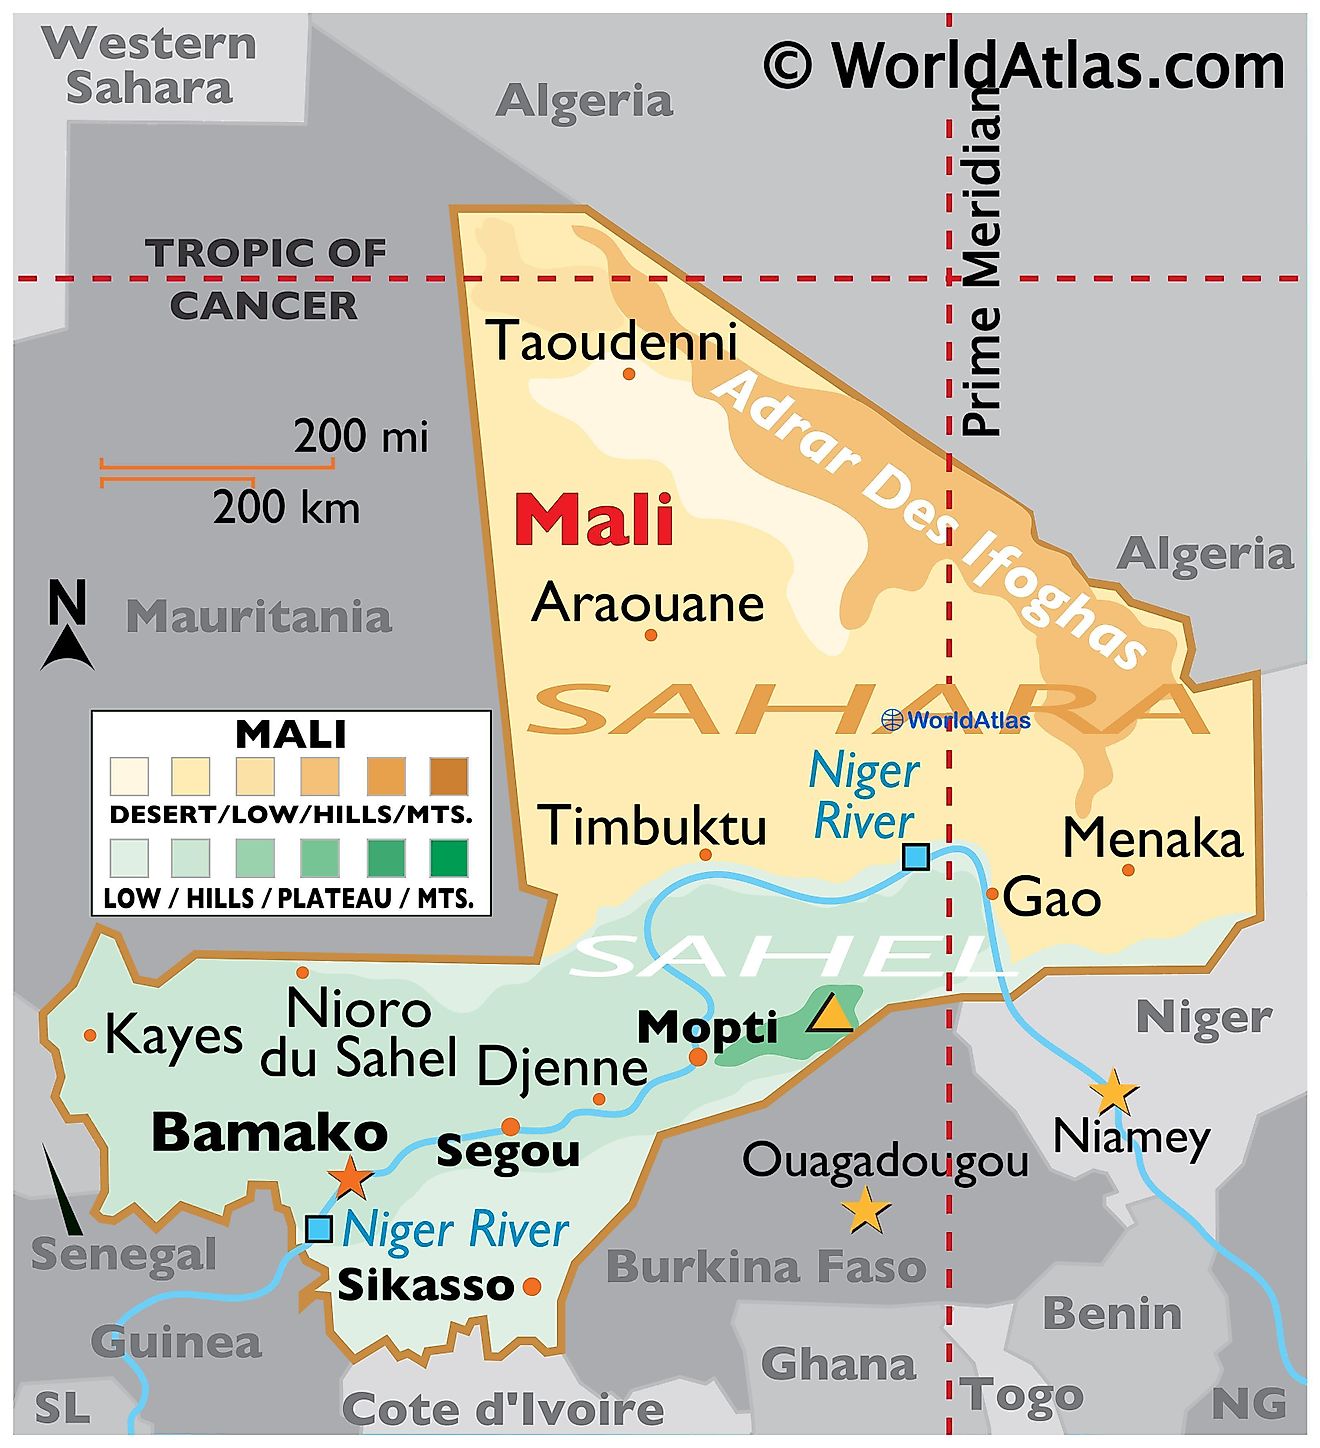 Physical Map of Mali with state boundaries, major rivers, deserts, highest peak, important cities, and more.